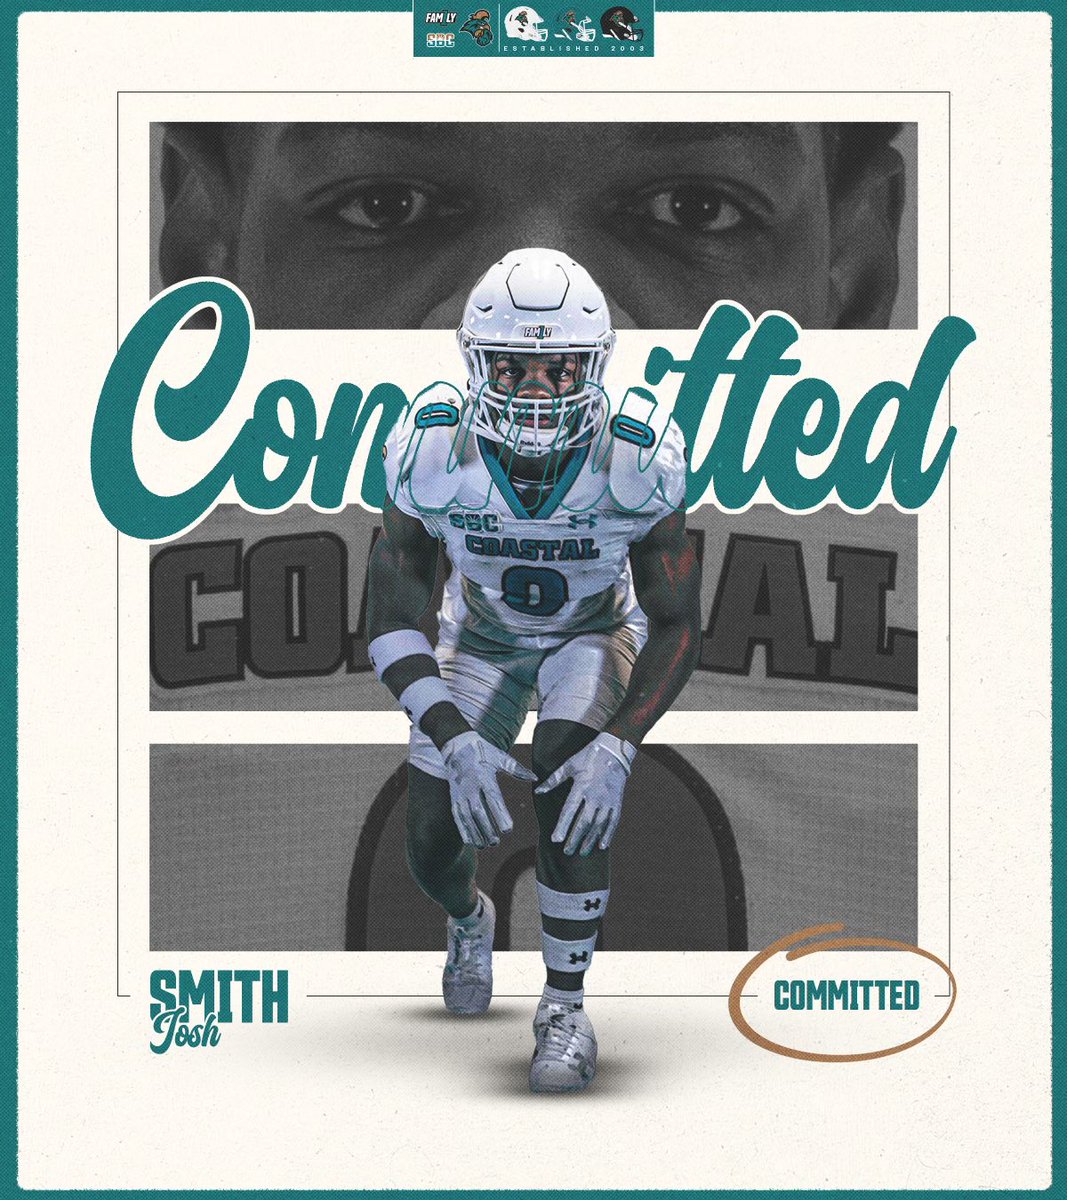 #AGTG✝️ Extremely blessed to be in this position!👌🏾🏝️ 1100% COMMITTED #FAM1LY